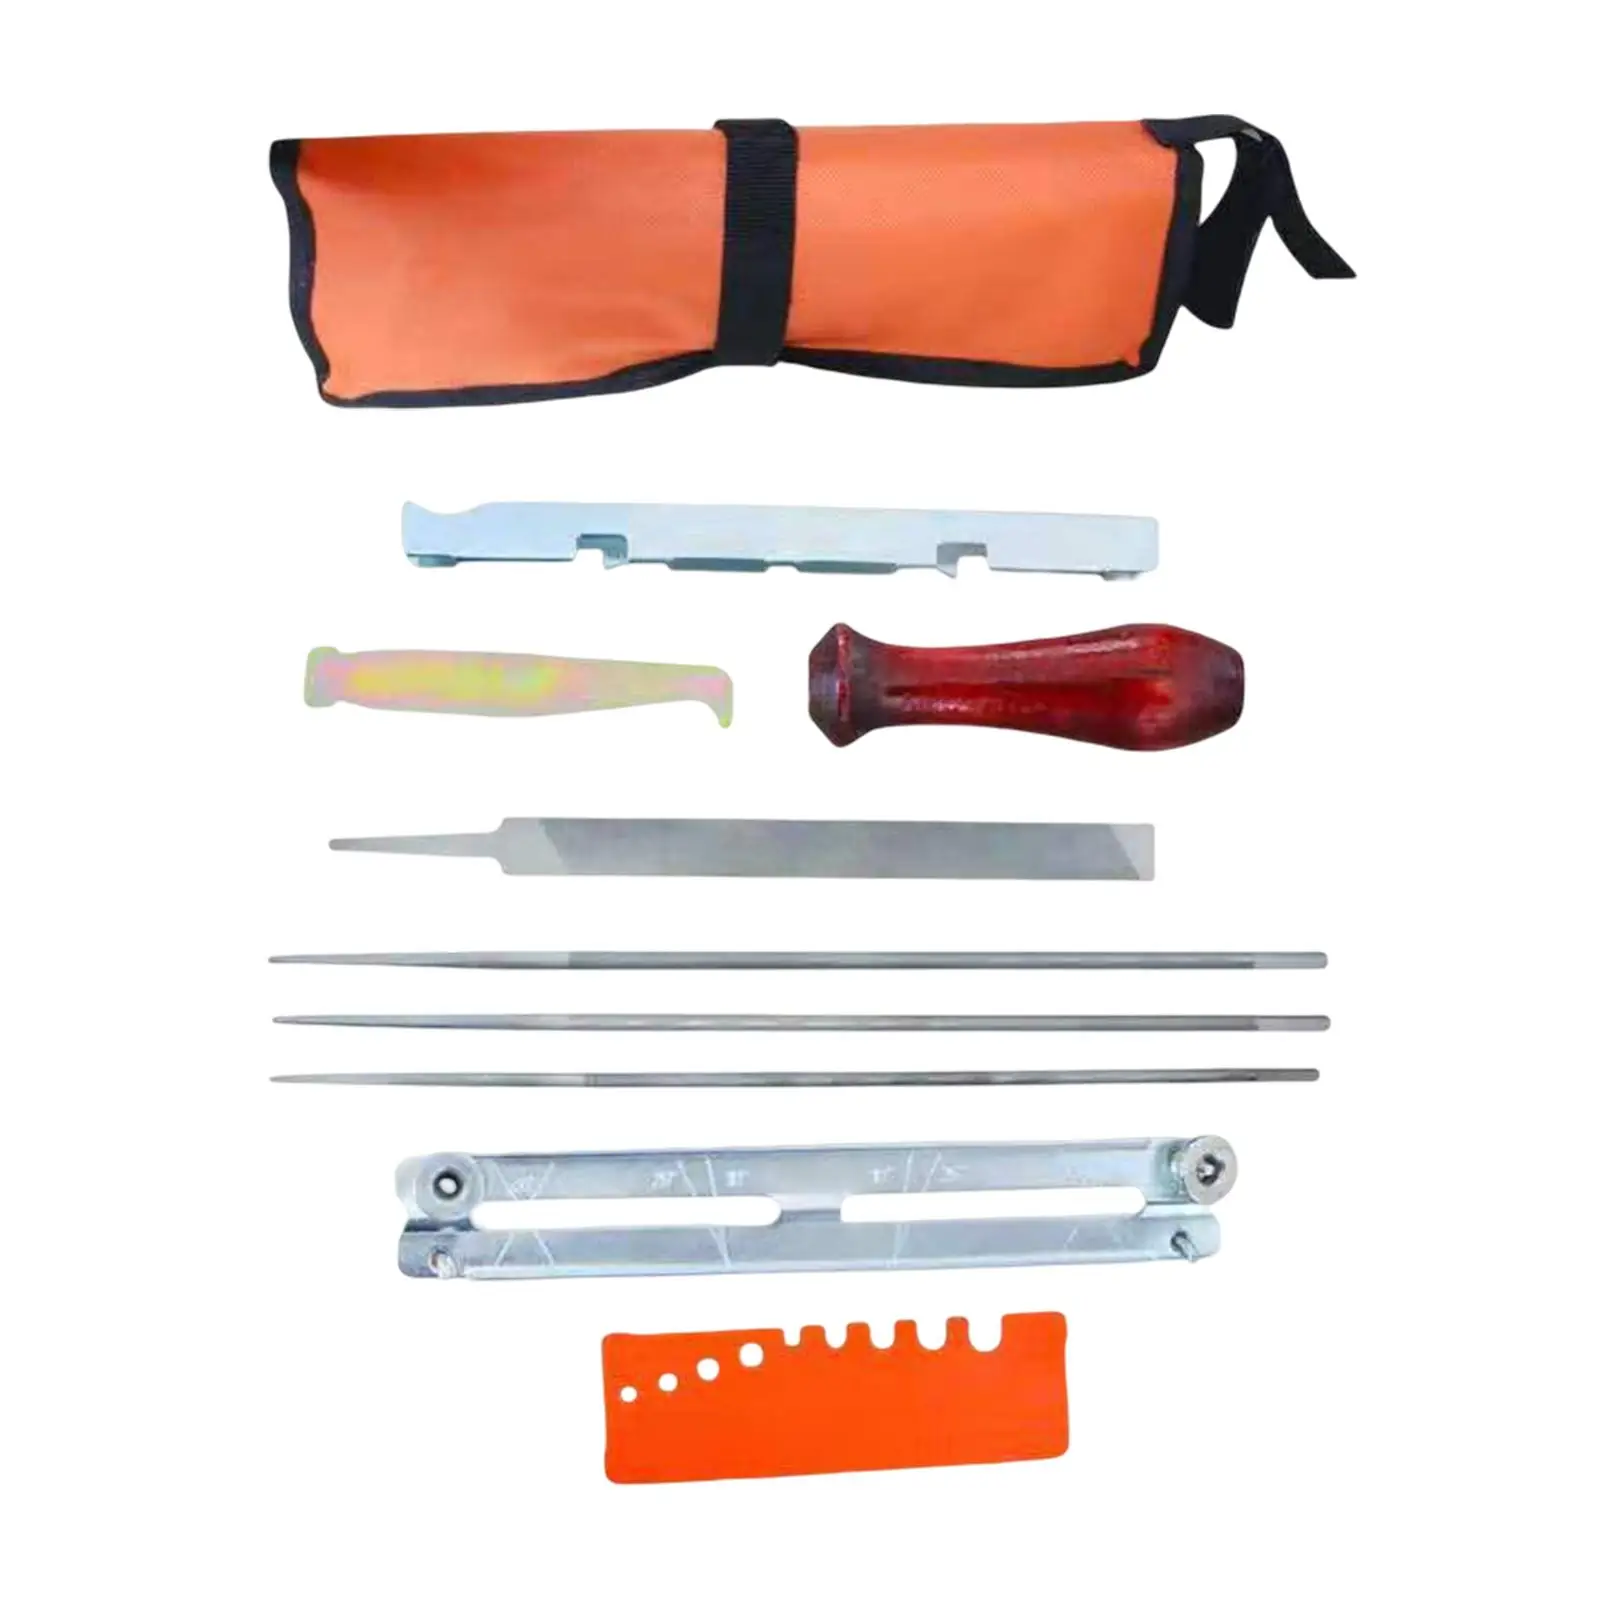 10Pcs Professional Chainsaw File Kit for Grinding and Filing Chainsaw Chain Depth Gauge with Tool Pouch Chainsaw Accessories